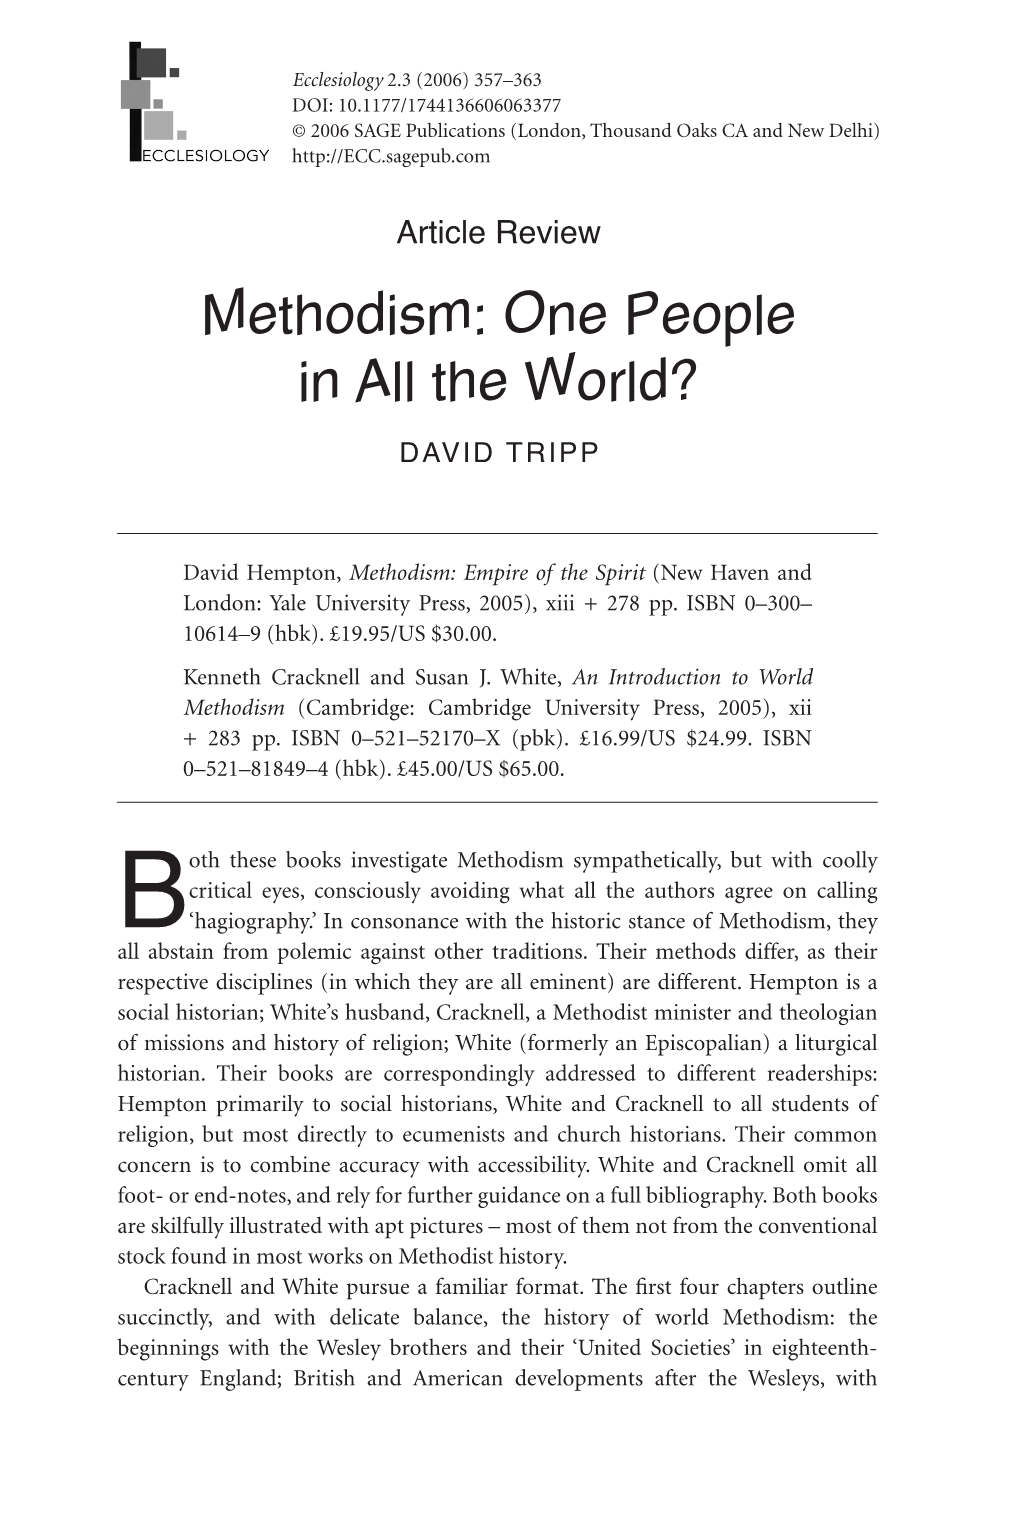 Methodism: One Peopledoi: 10.1177/1744136606063377 in All the World? 357 © 2006 SAGE Publications (London, Thousand Oaks CA and New Delhi)